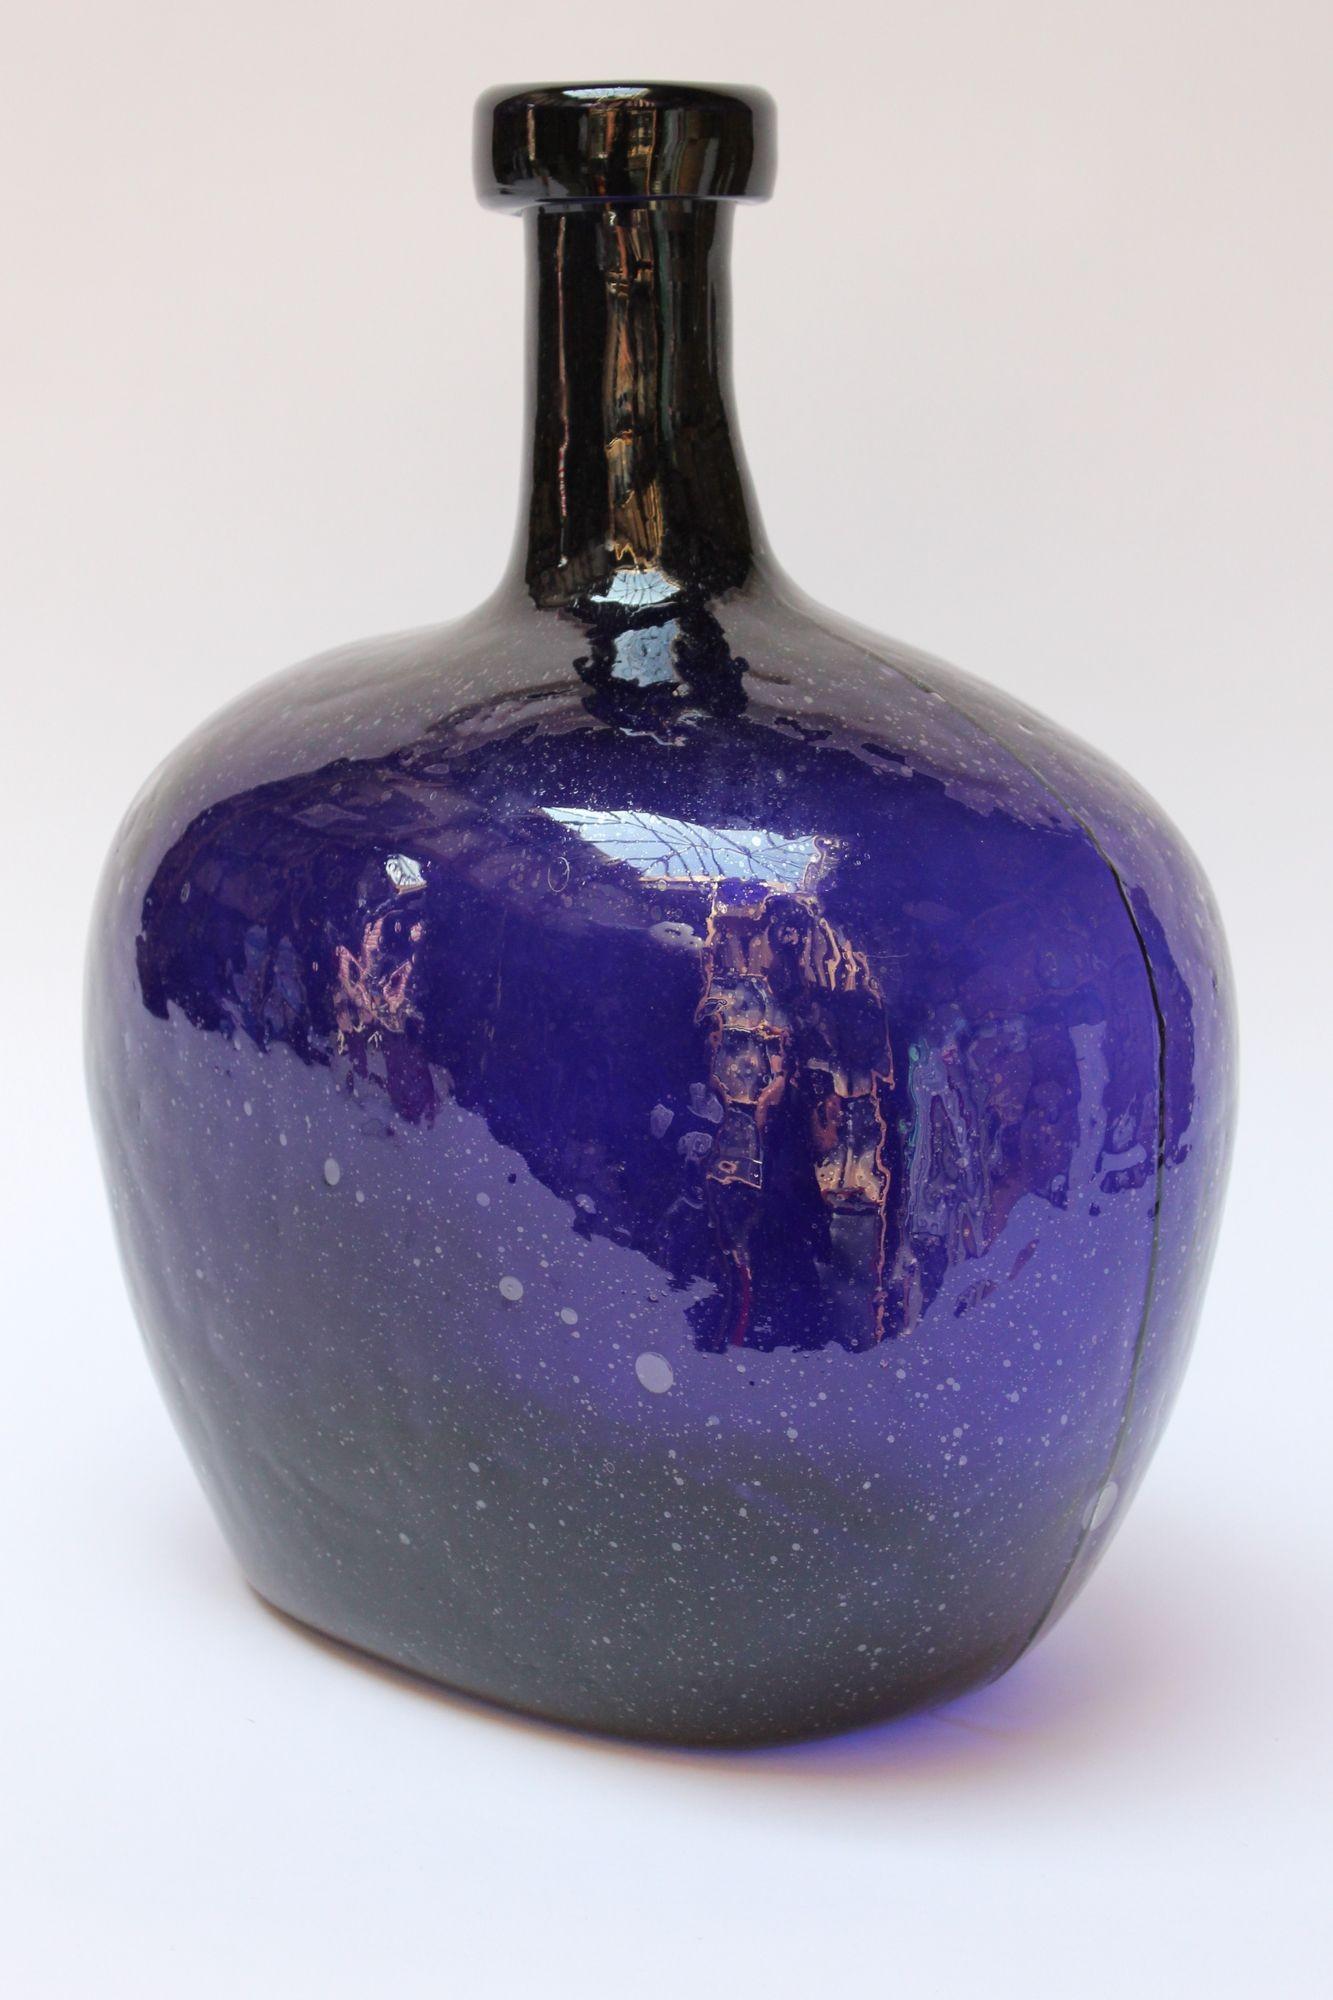 Demijohn / Carboy originally used for transporting wine (ca. Mid-20th century, USA). Composed of 'blown-to-mold' glass (a method accepted as 'hand-blowing') exhibiting trapped air bubbles within the glass itself with a thick lip. Striking indigo